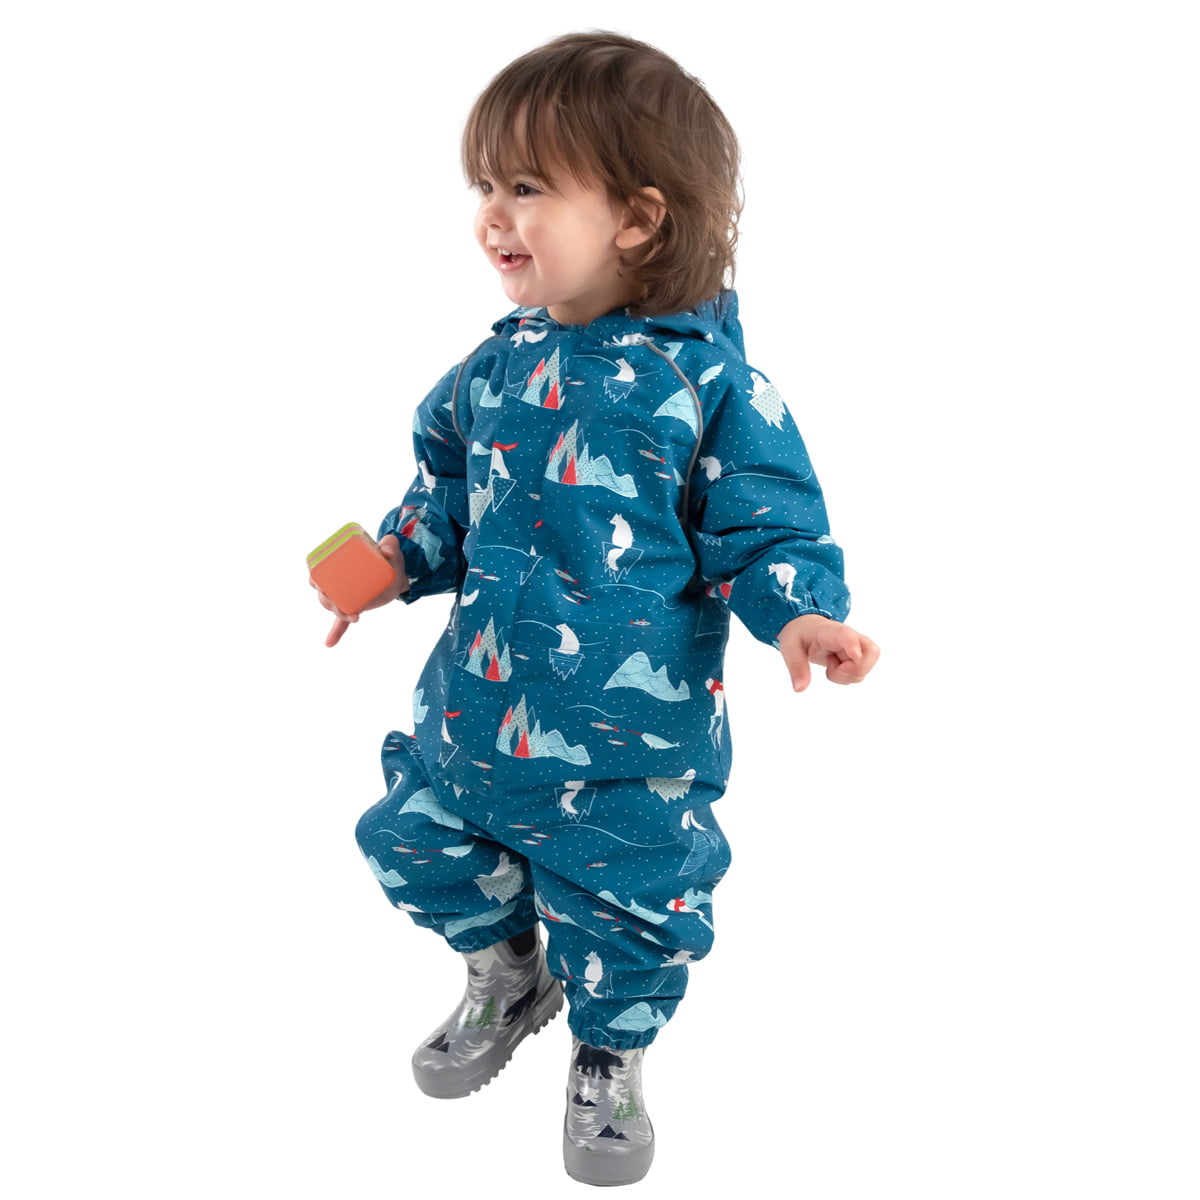 JAN & JUL Waterproof One-Piece Puddle-Dry Rain Play-Suit for Baby Toddler and Kids